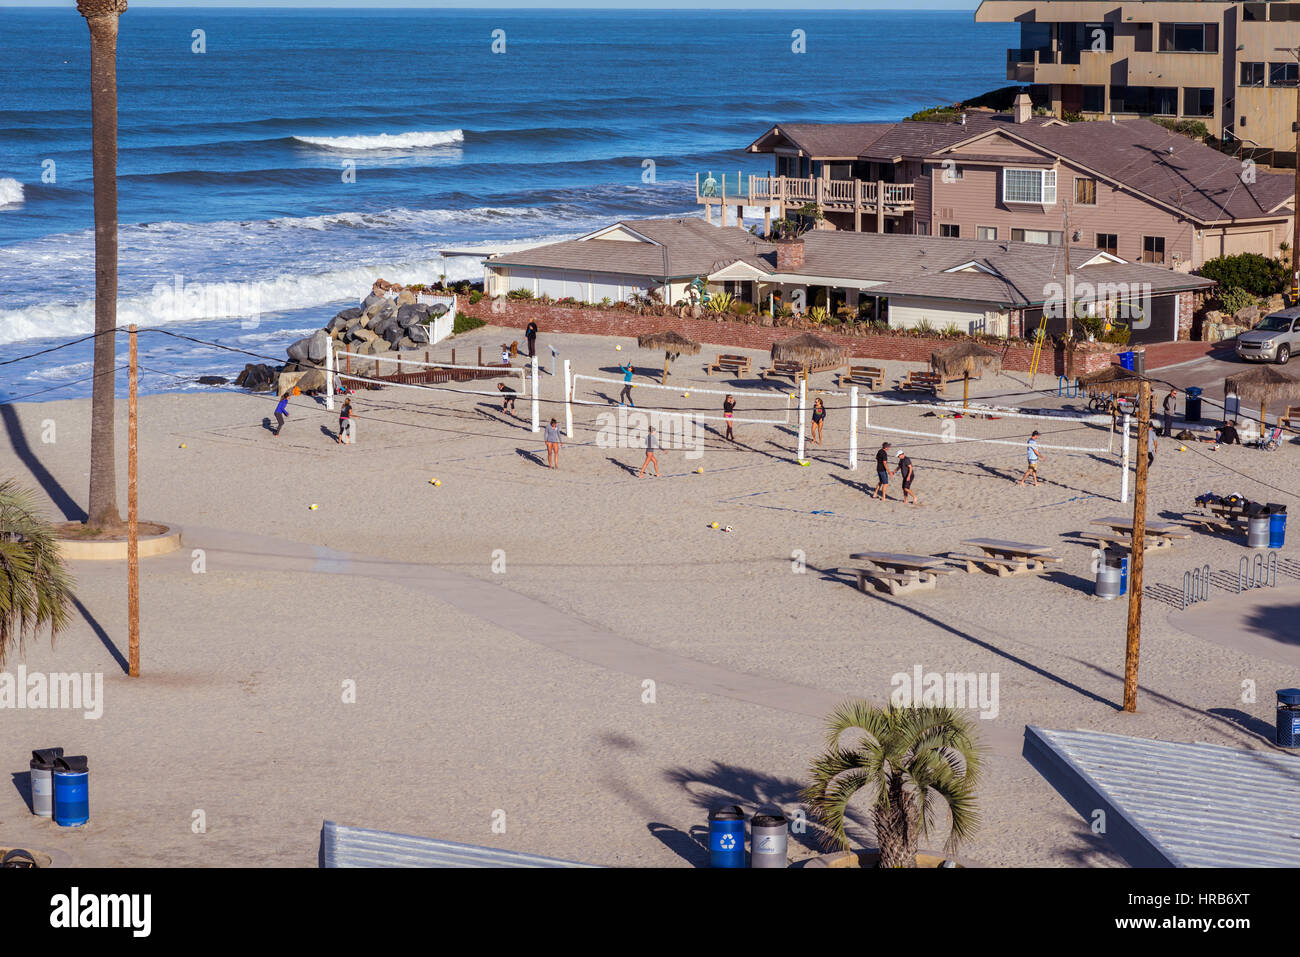 Looking down on the beach volleyball courts at Moonlight State Beach in Encinitas, California. Stock Photo